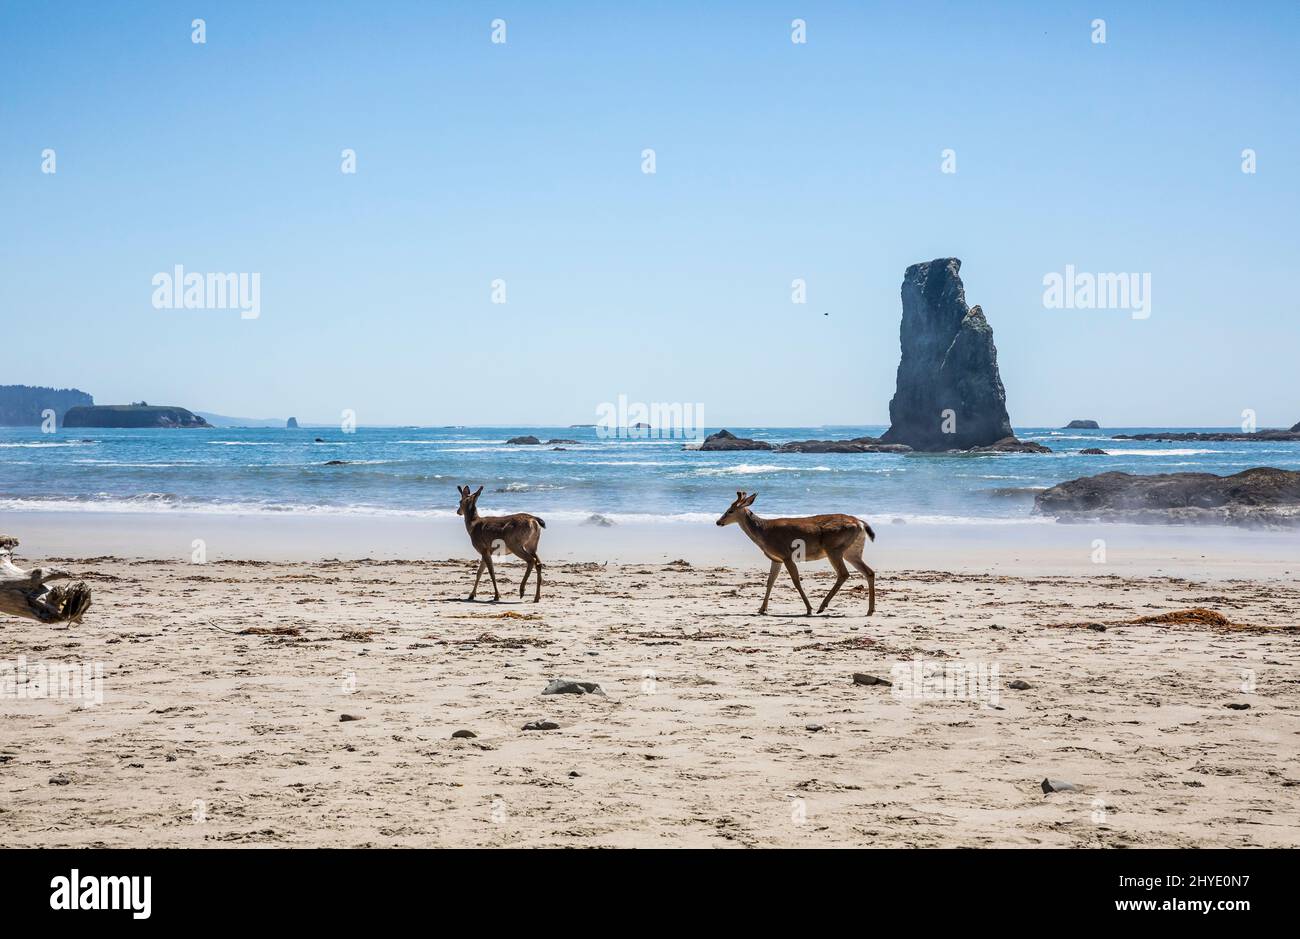 Two deer walking on the beach on the beach near Toleak Point, Olympic National Marine preserve and Olympic National Park coastal strip, Washington, US Stock Photo